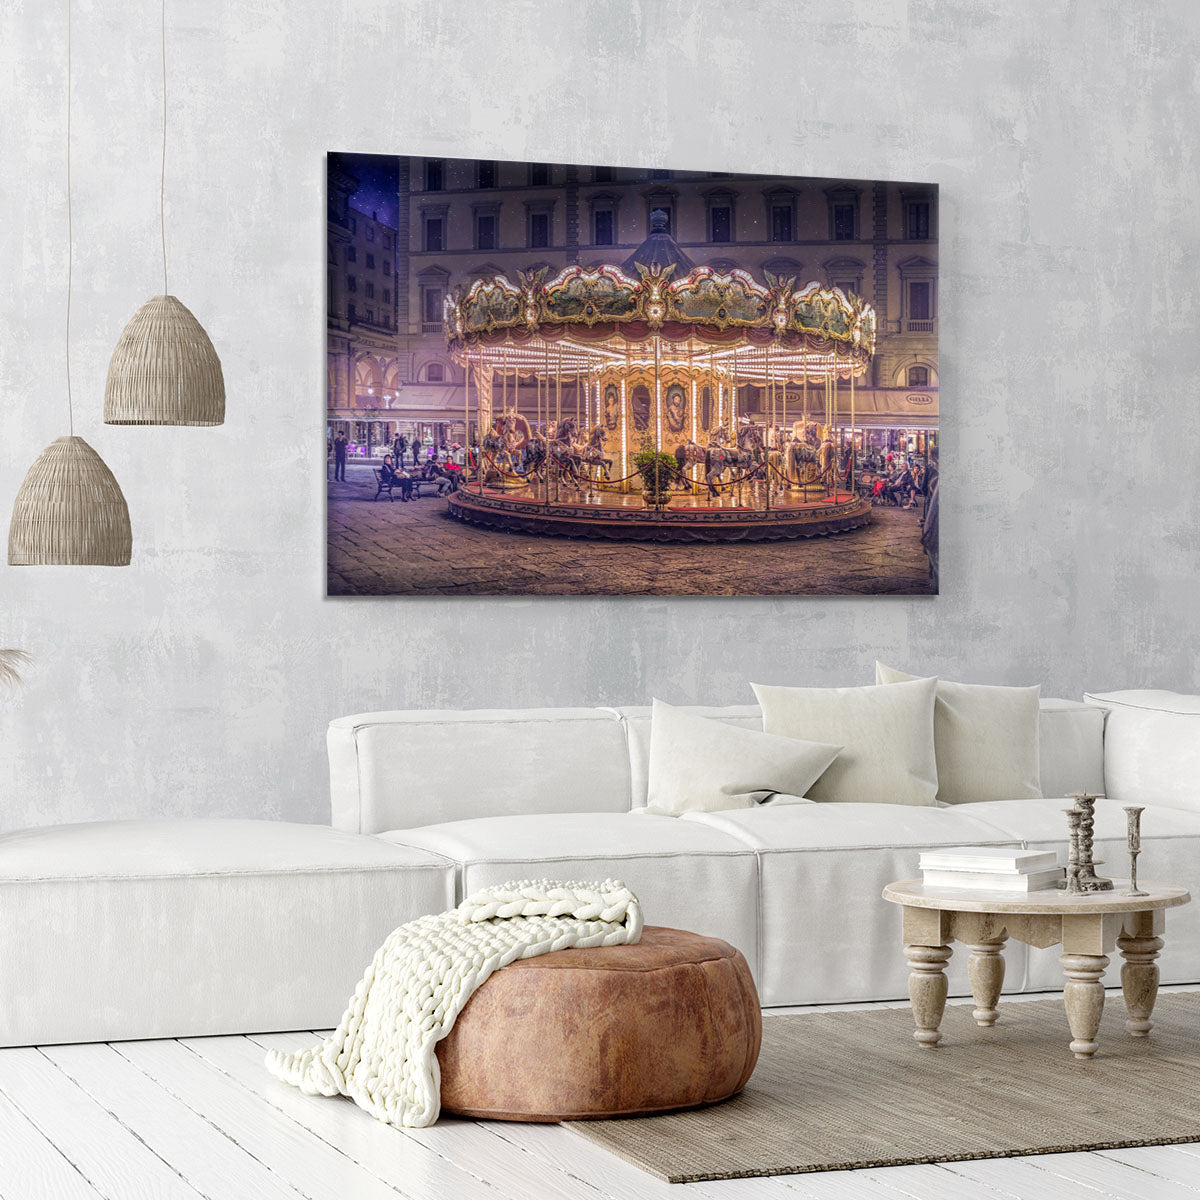 Carousel Canvas Print or Poster - 1x - 6